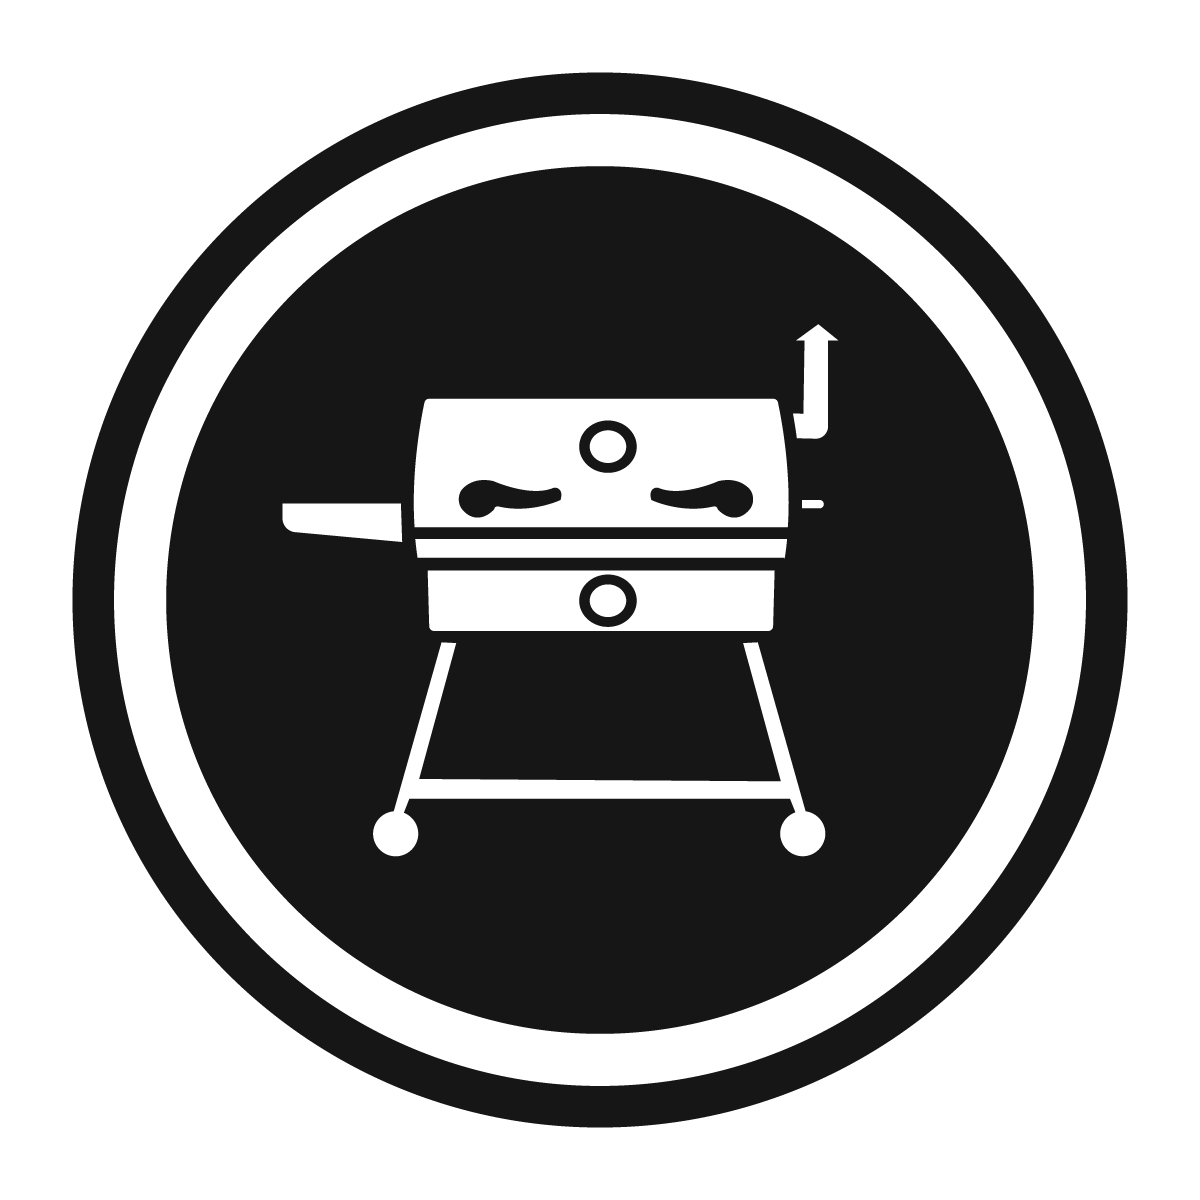 recteq wood pellet grills' high quality grills icon with grill in white on black background.